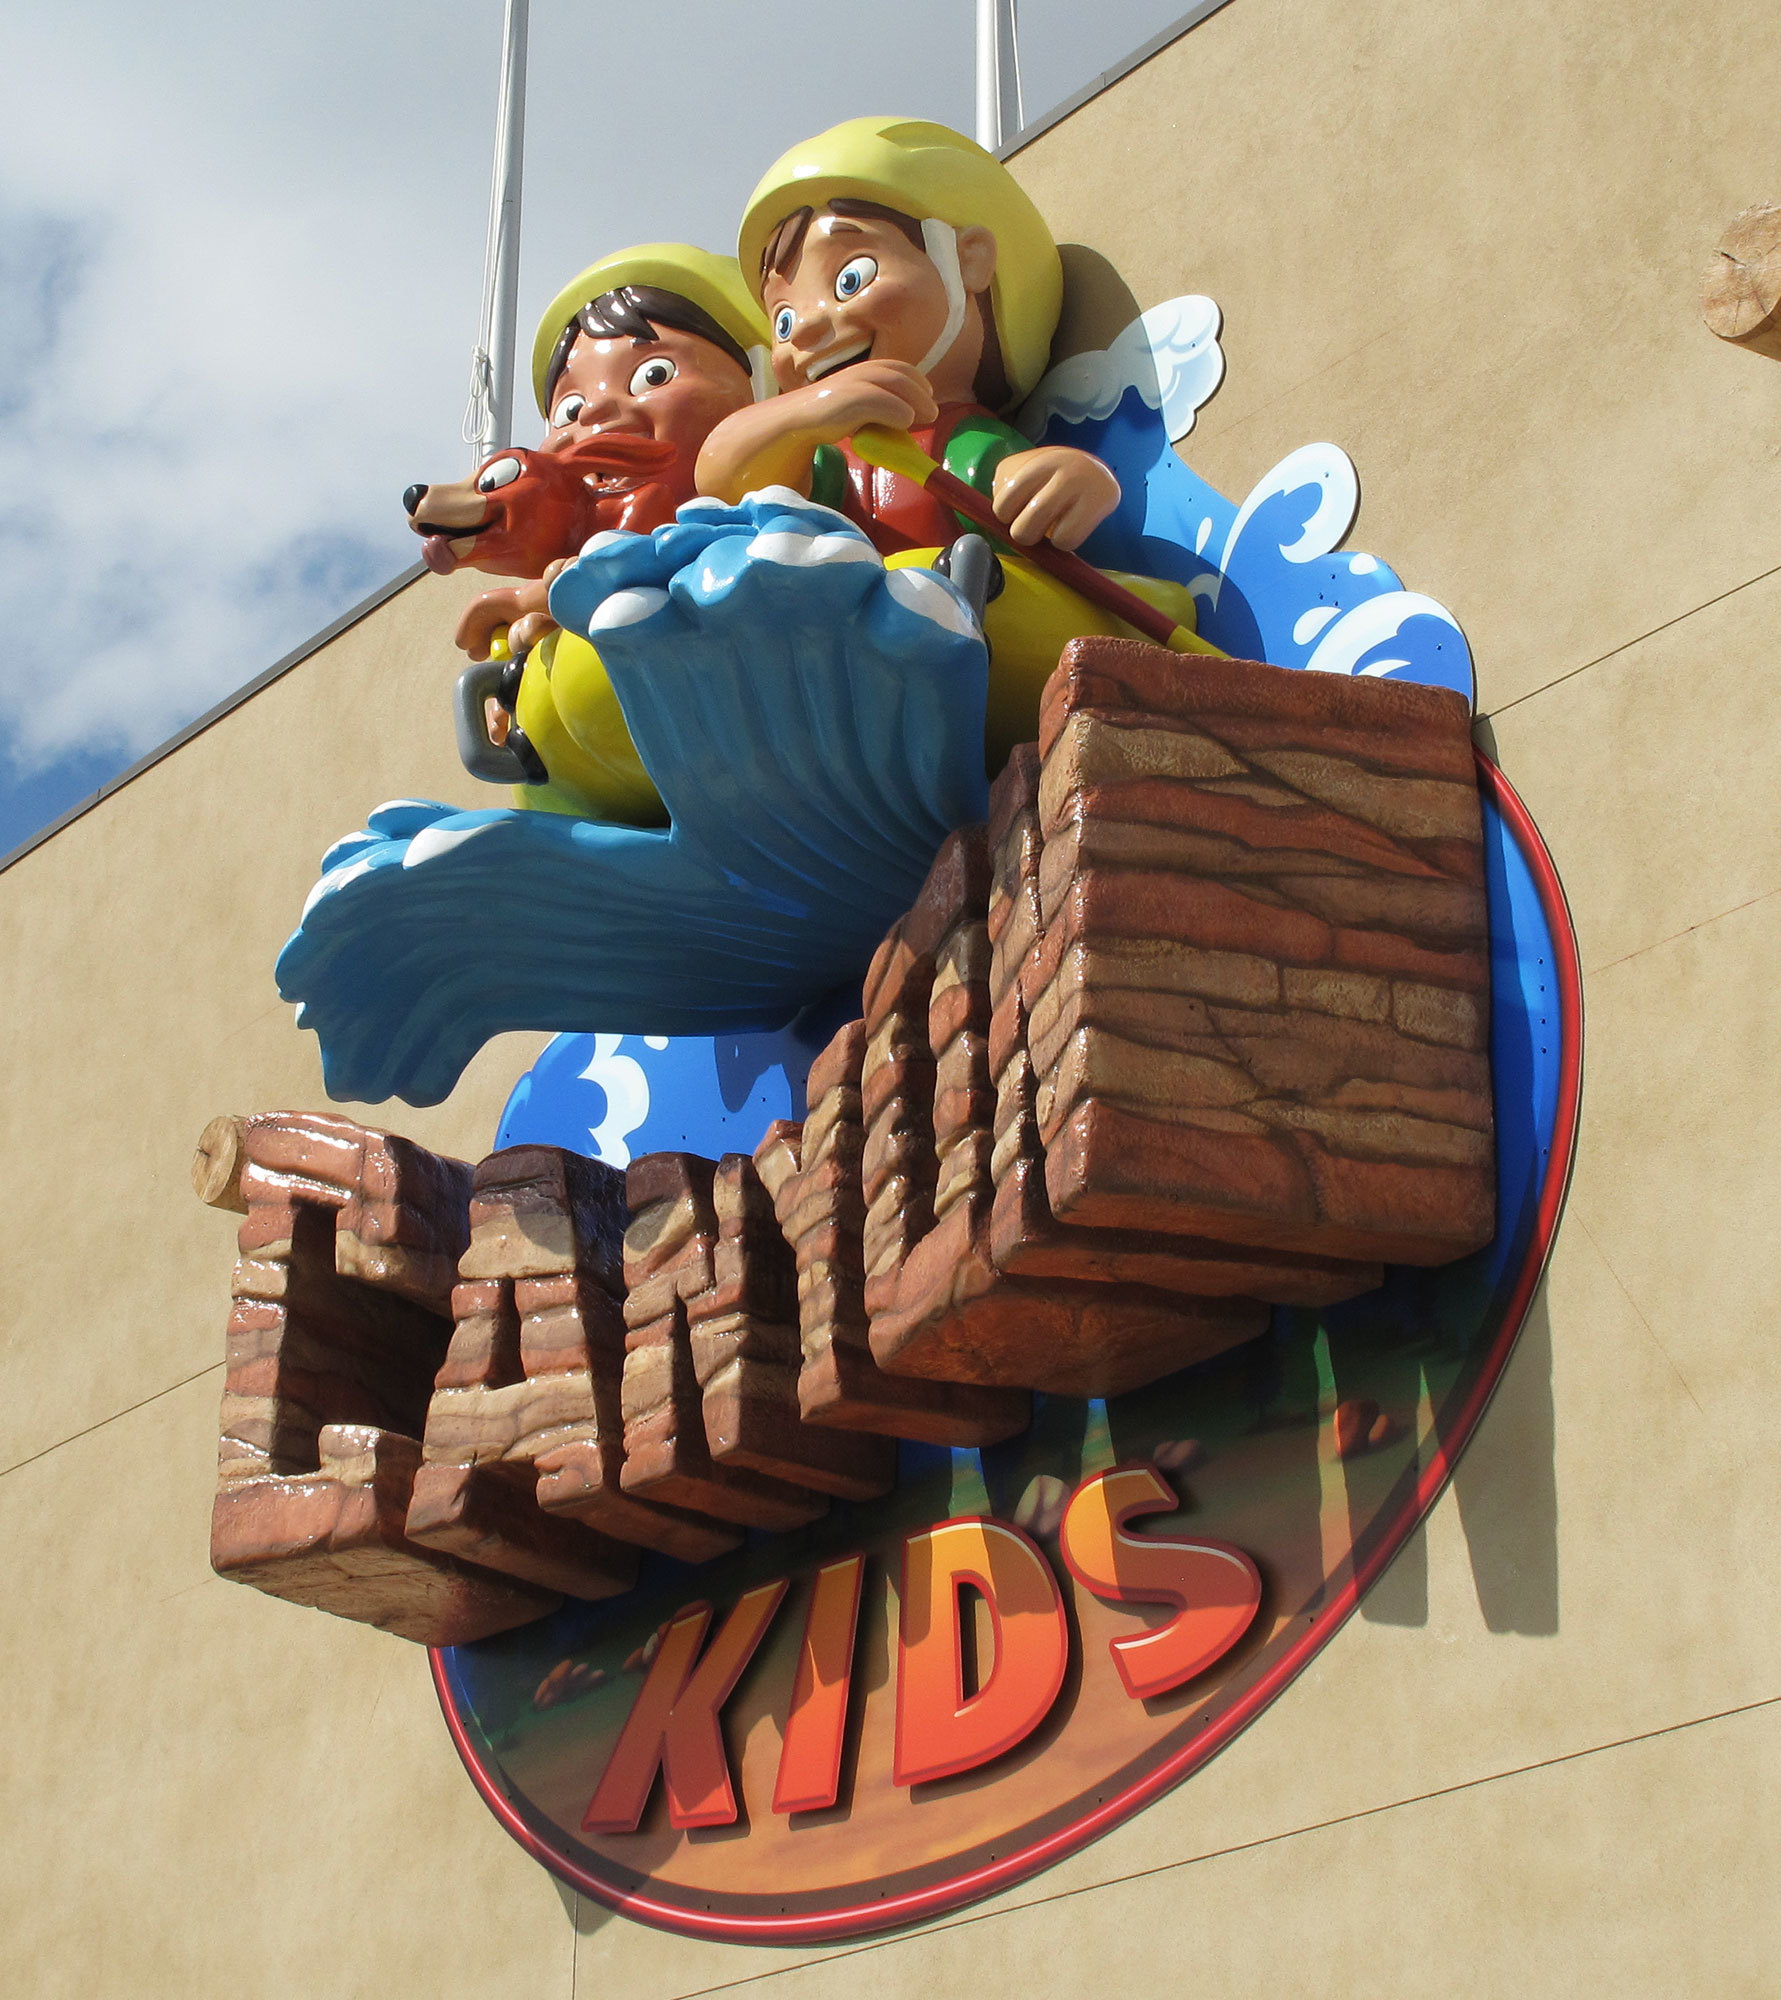 3D relief sculpted sign with 2 kids in a raft above the words "Canyon Kids" as a sign high on an exterior wall of a church